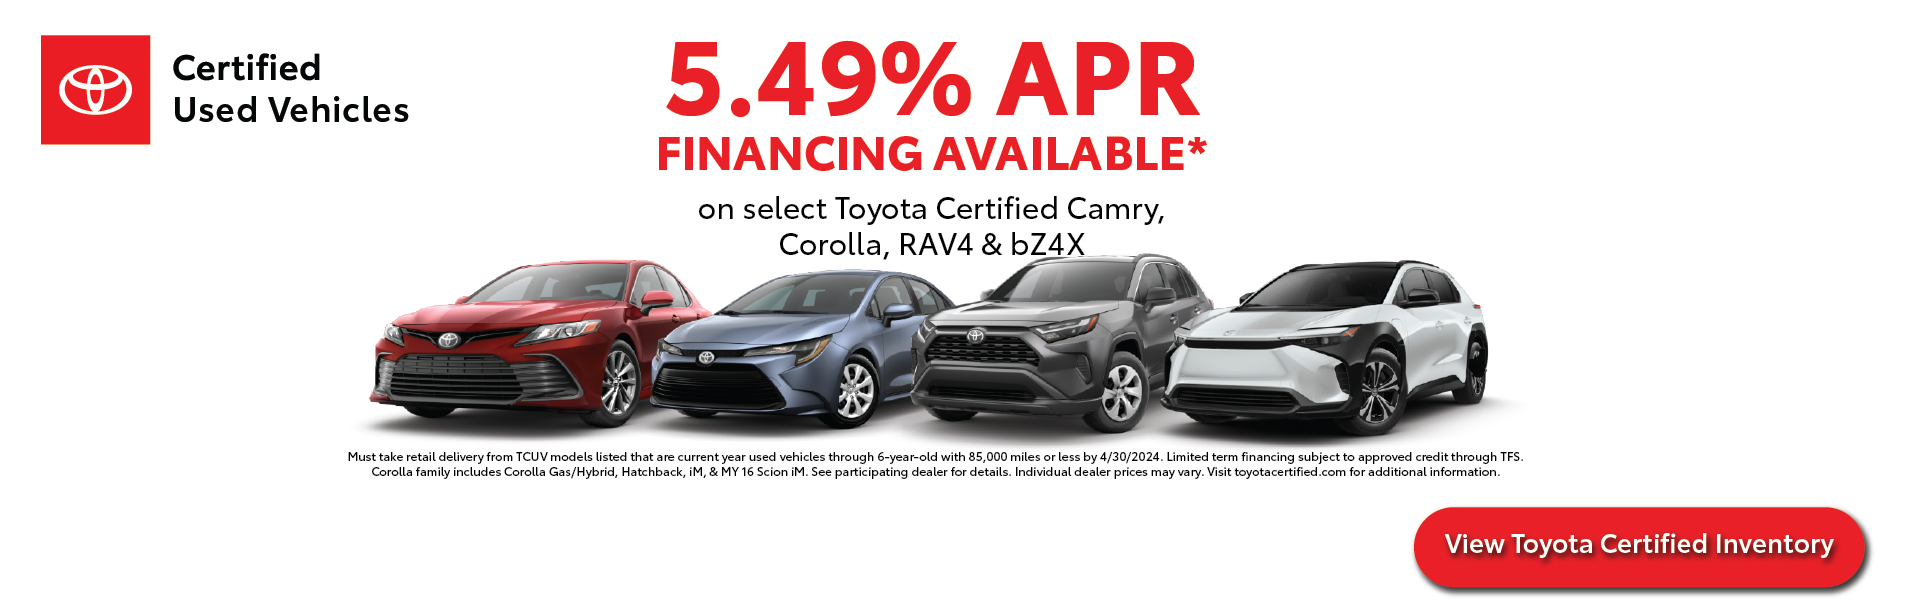 Toyota Certified Used Vehicle Offer | Woodrum Toyota of Macomb in Macomb IL